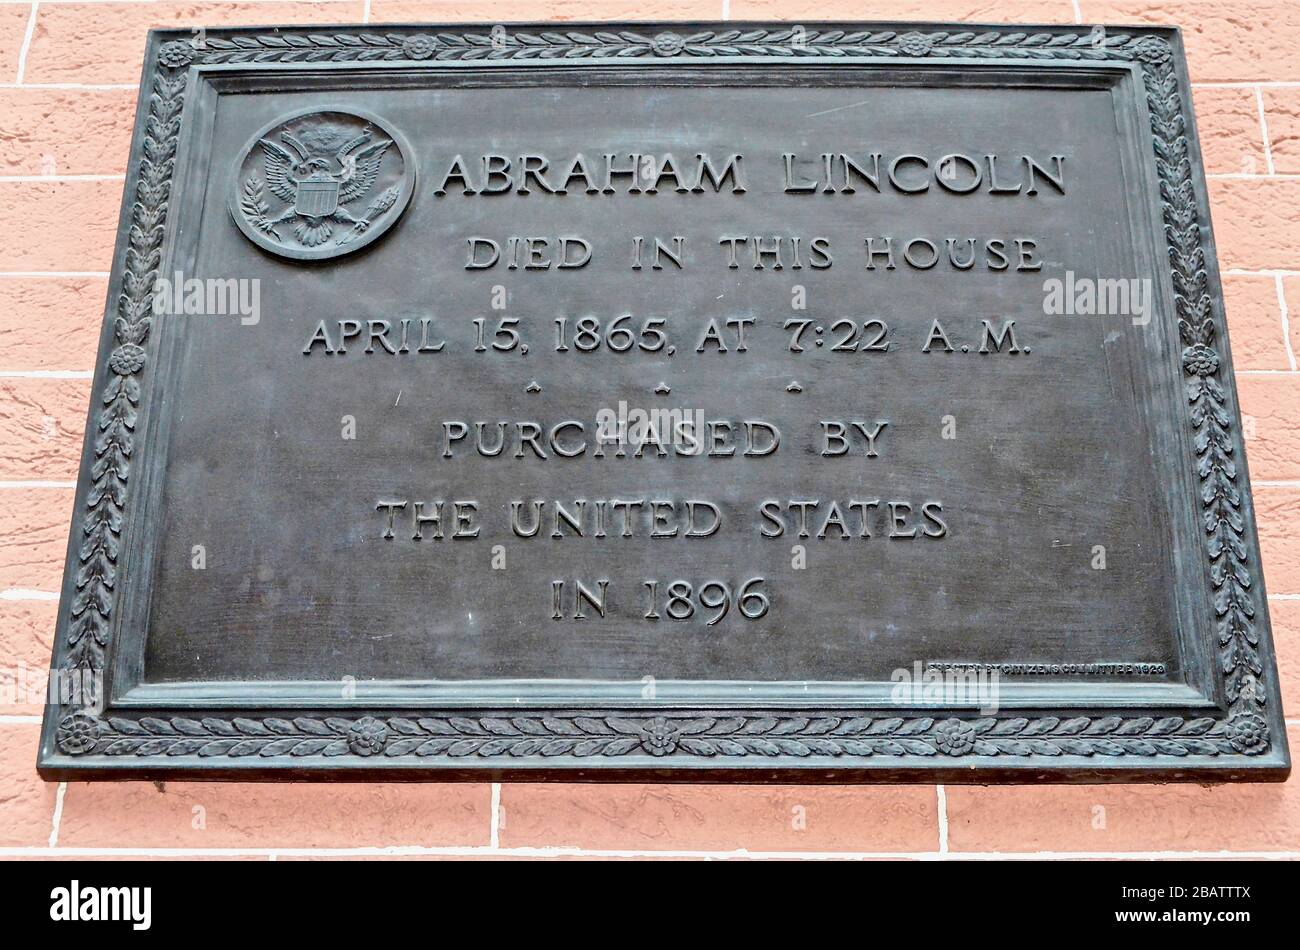 Washington D.C. travel and view of Abraham Lincoln's memorial plaque Stock Photo